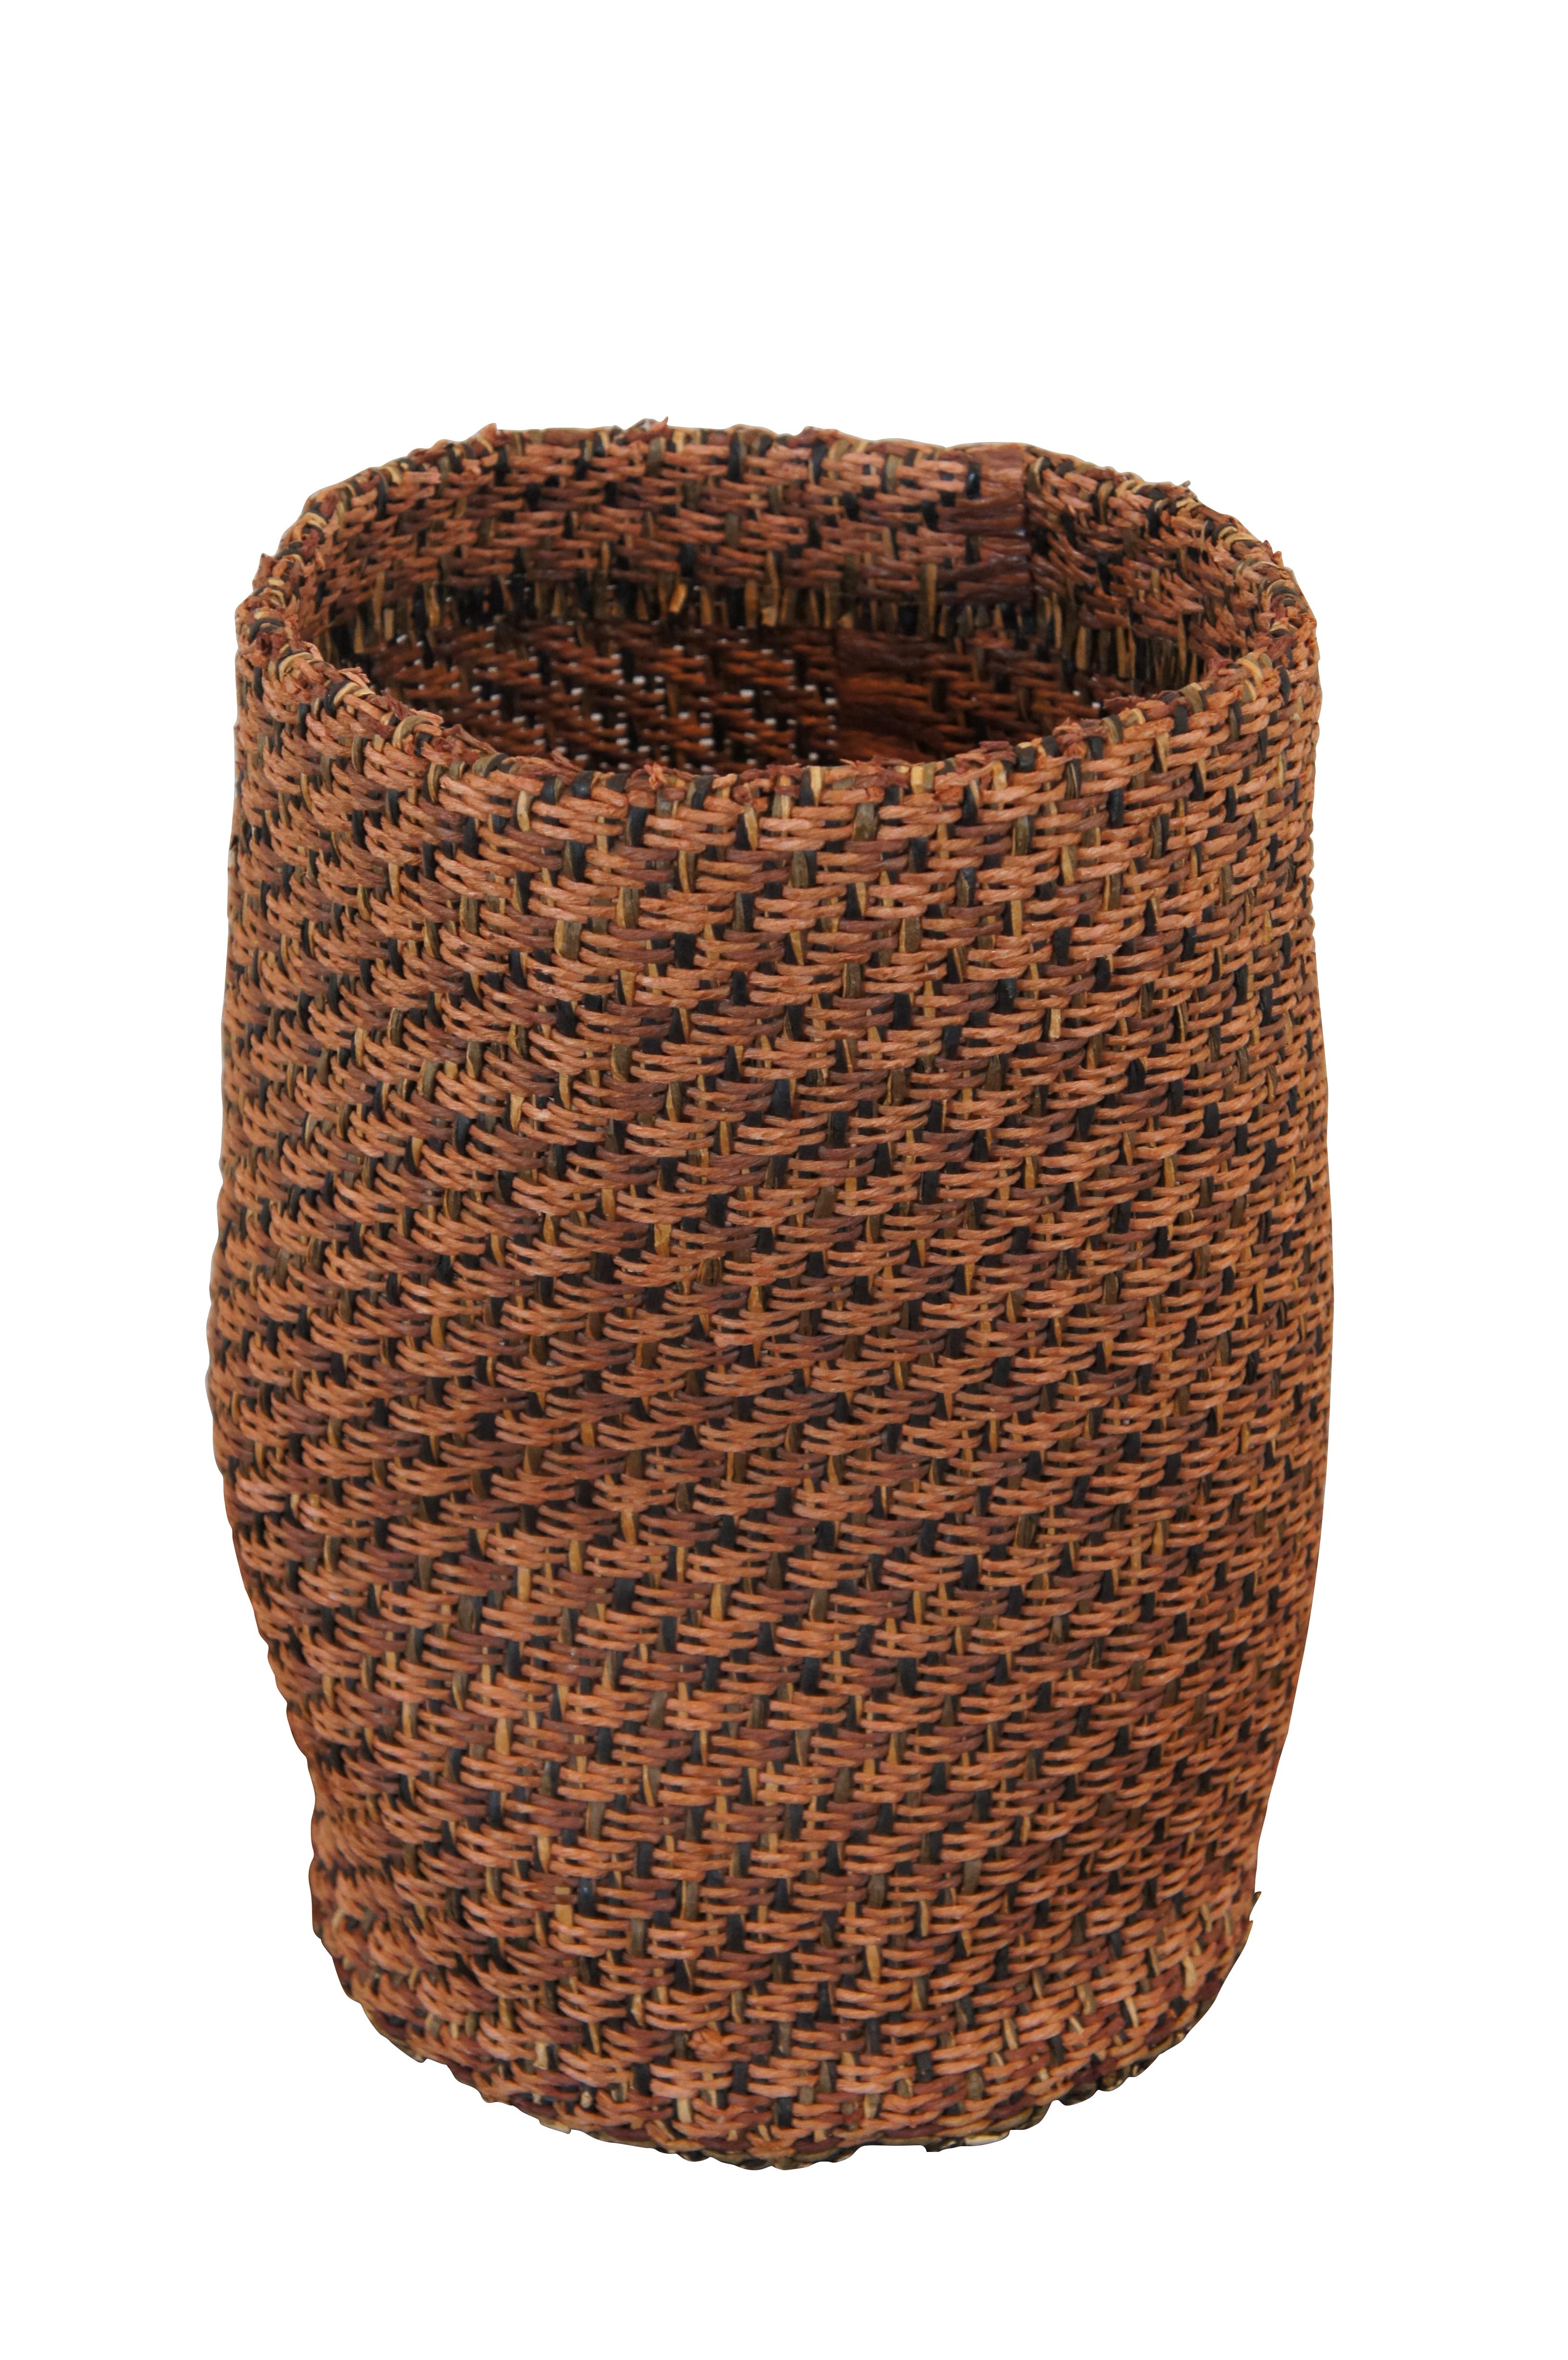 Vintage freeform waste / trash basket or storage bin.  Made of sisal / rattan / wicker featuring soft walls and wood base. 

DIMENSIONS

10.5” x 15.5” (Diameter x Height)